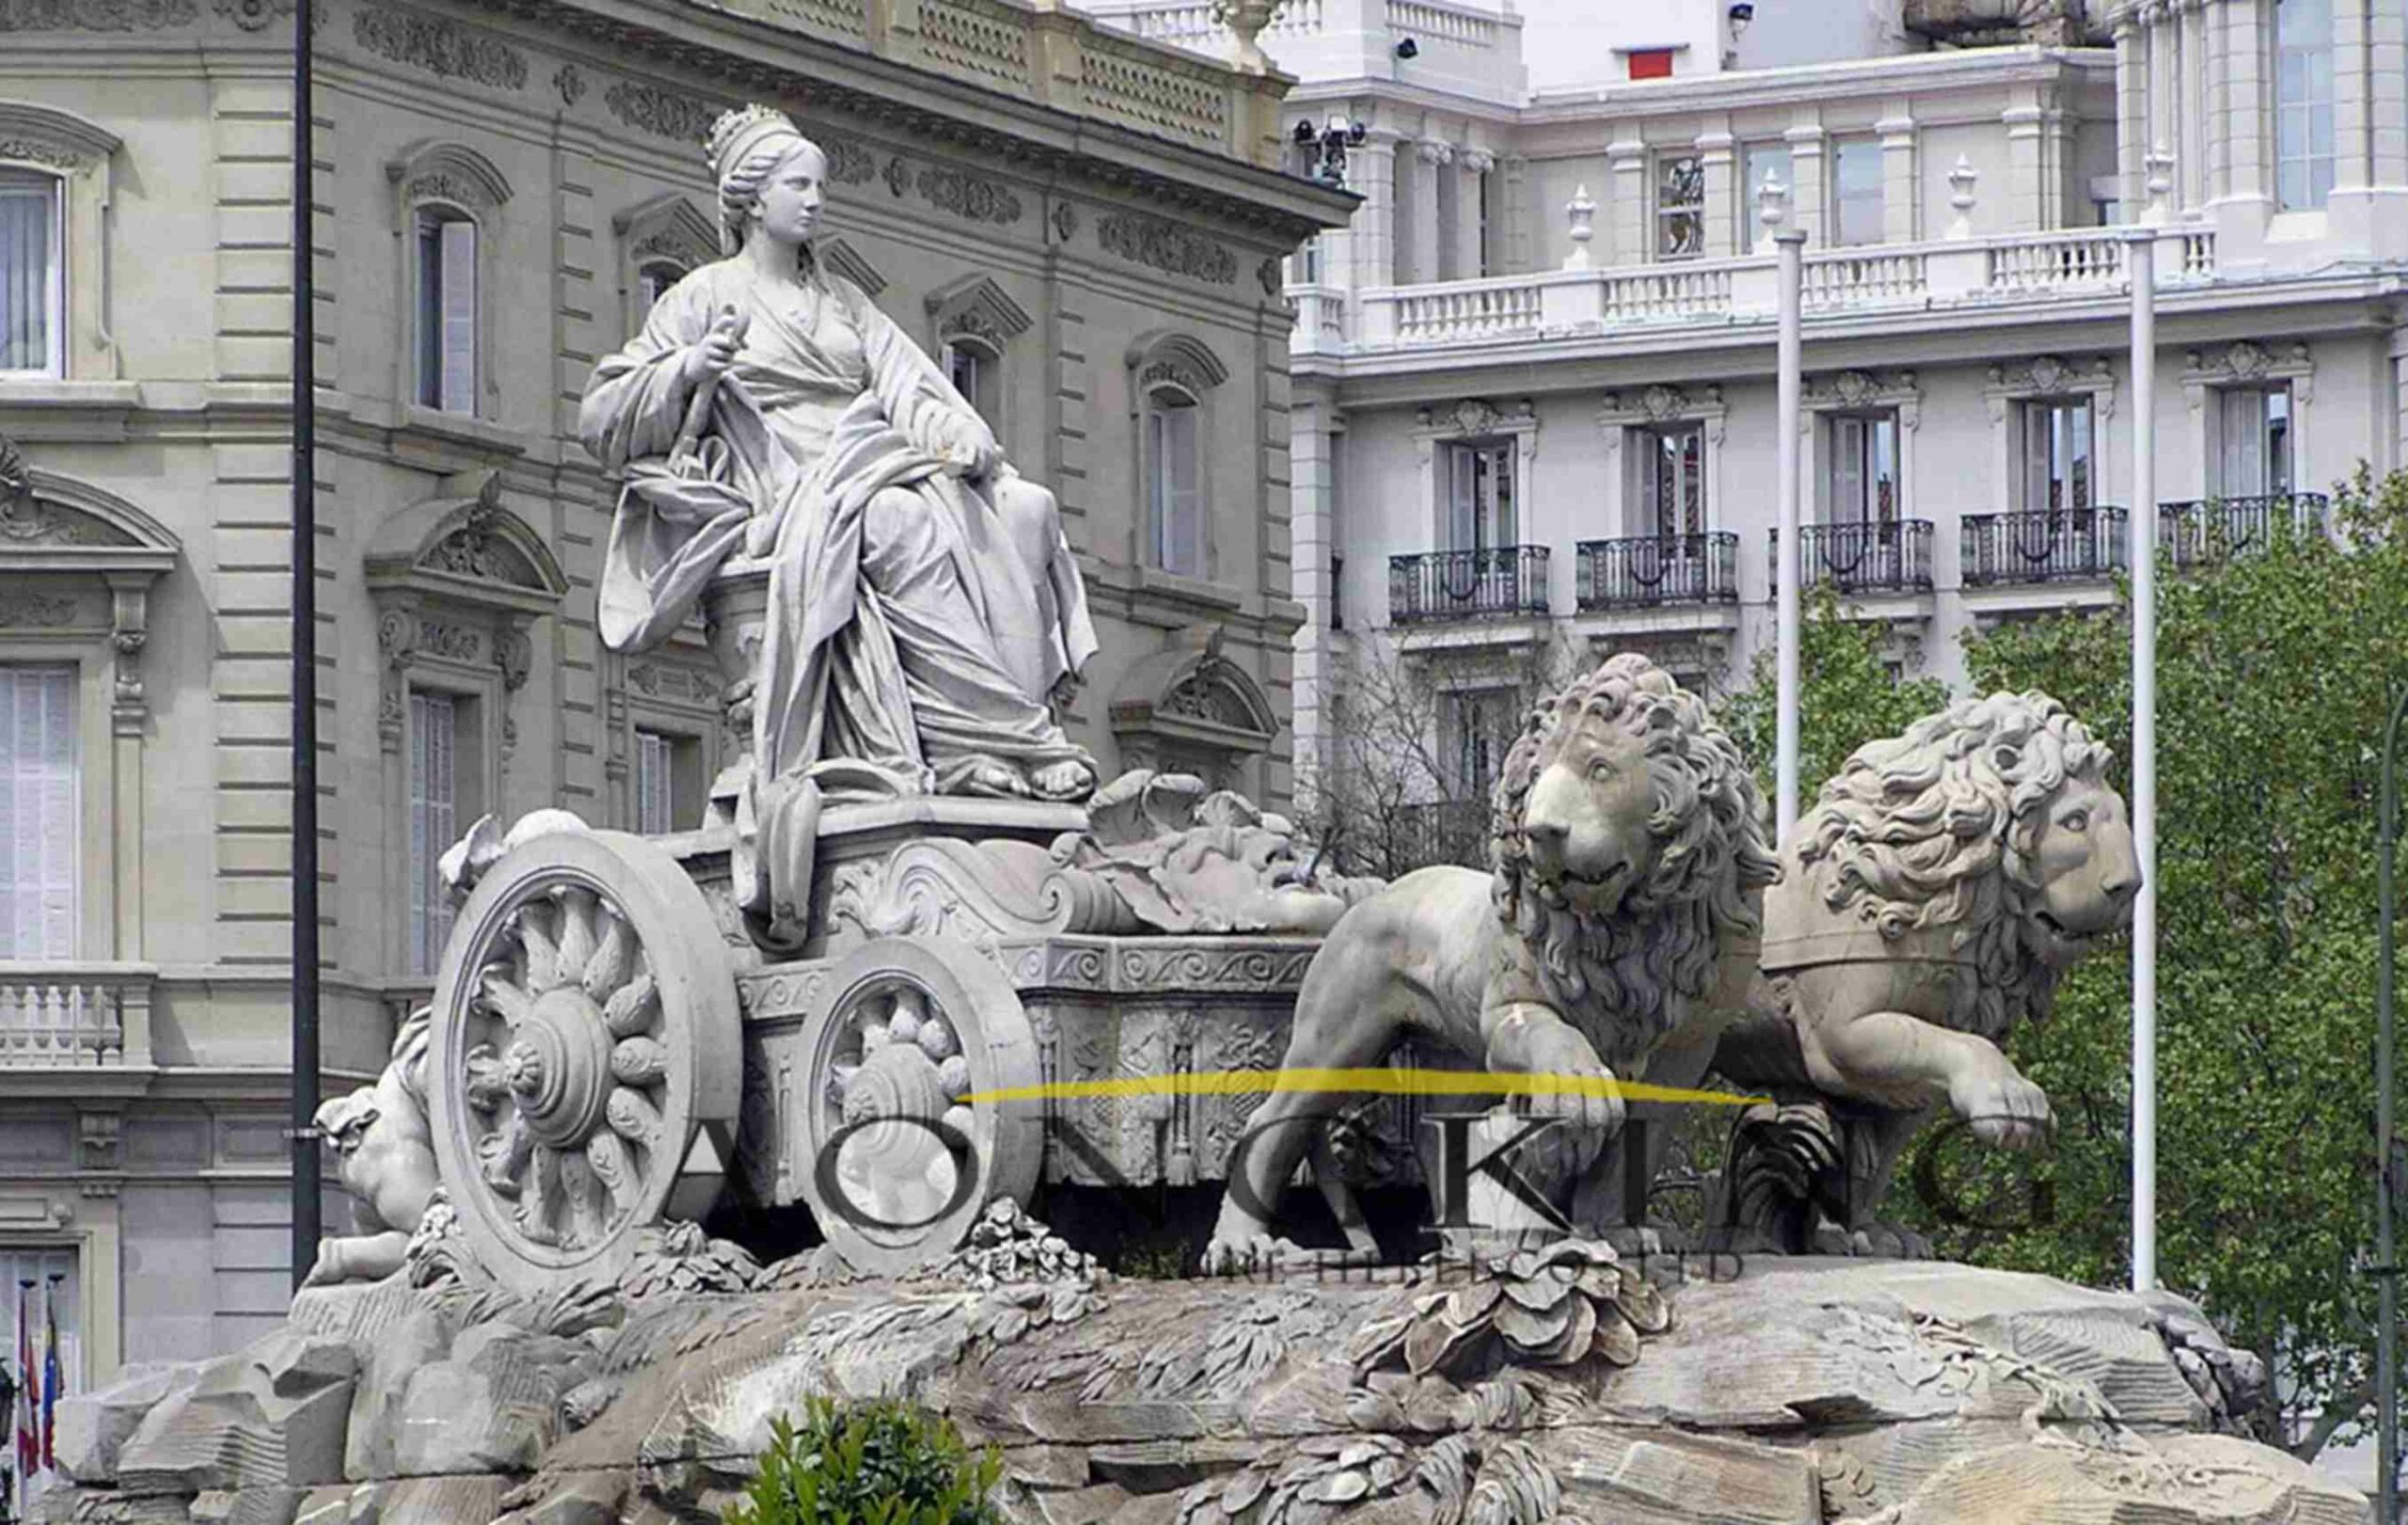 The Greek goddess Cibeles with marble sculptures (1)